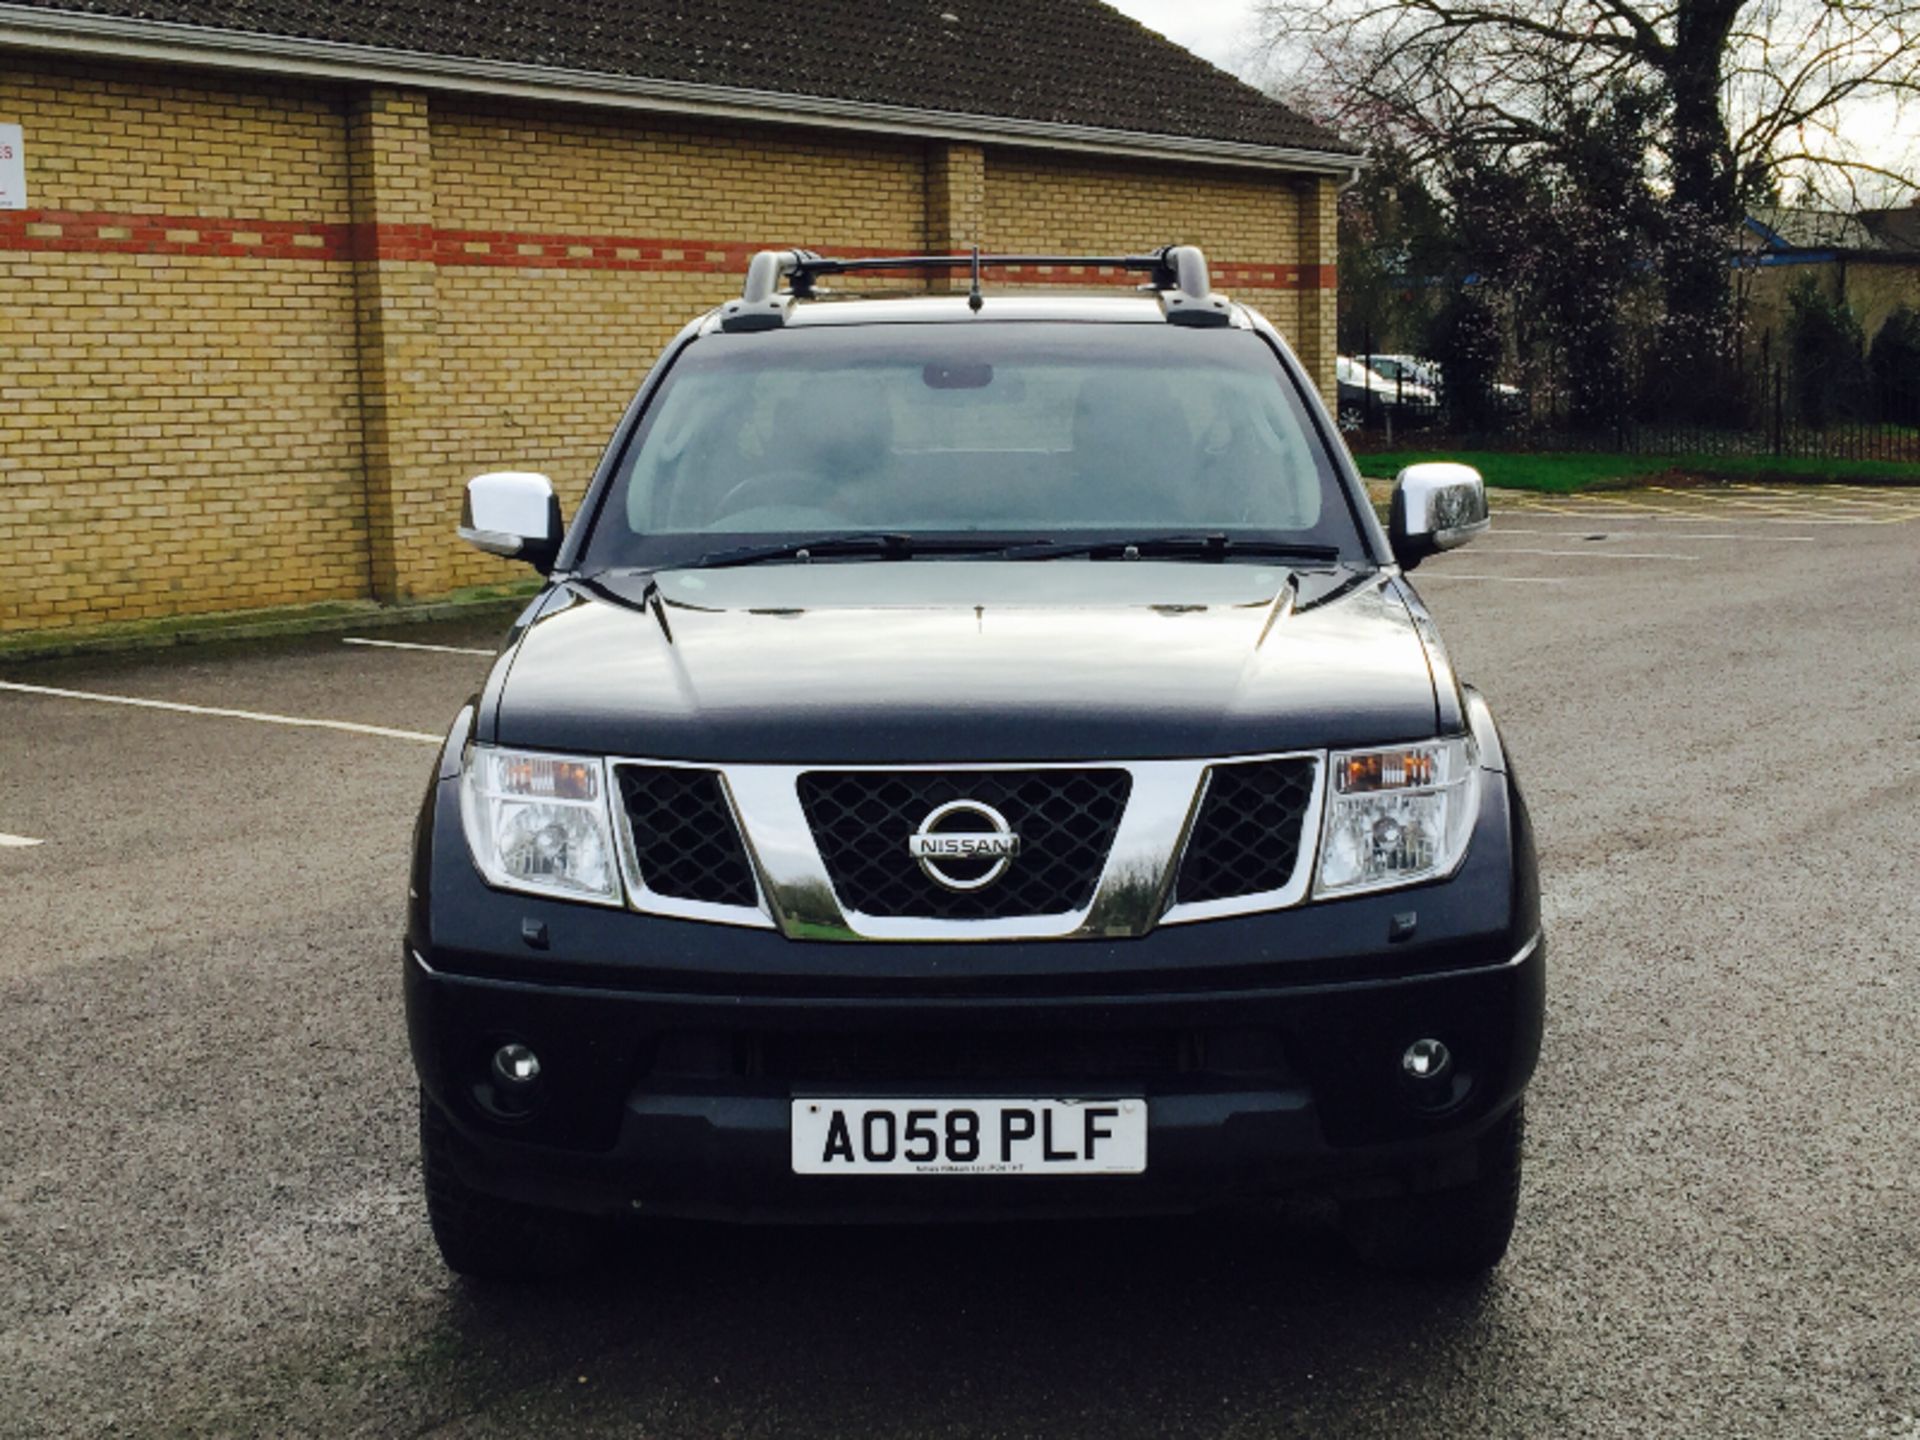 (ON SALE) NISSAN NAVARA 'LONG WAY DOWN' (2009) DOUBLE CAB PICK-UP "BLACK EDITION" 2.5 DCI  (NO VAT) - Image 2 of 15